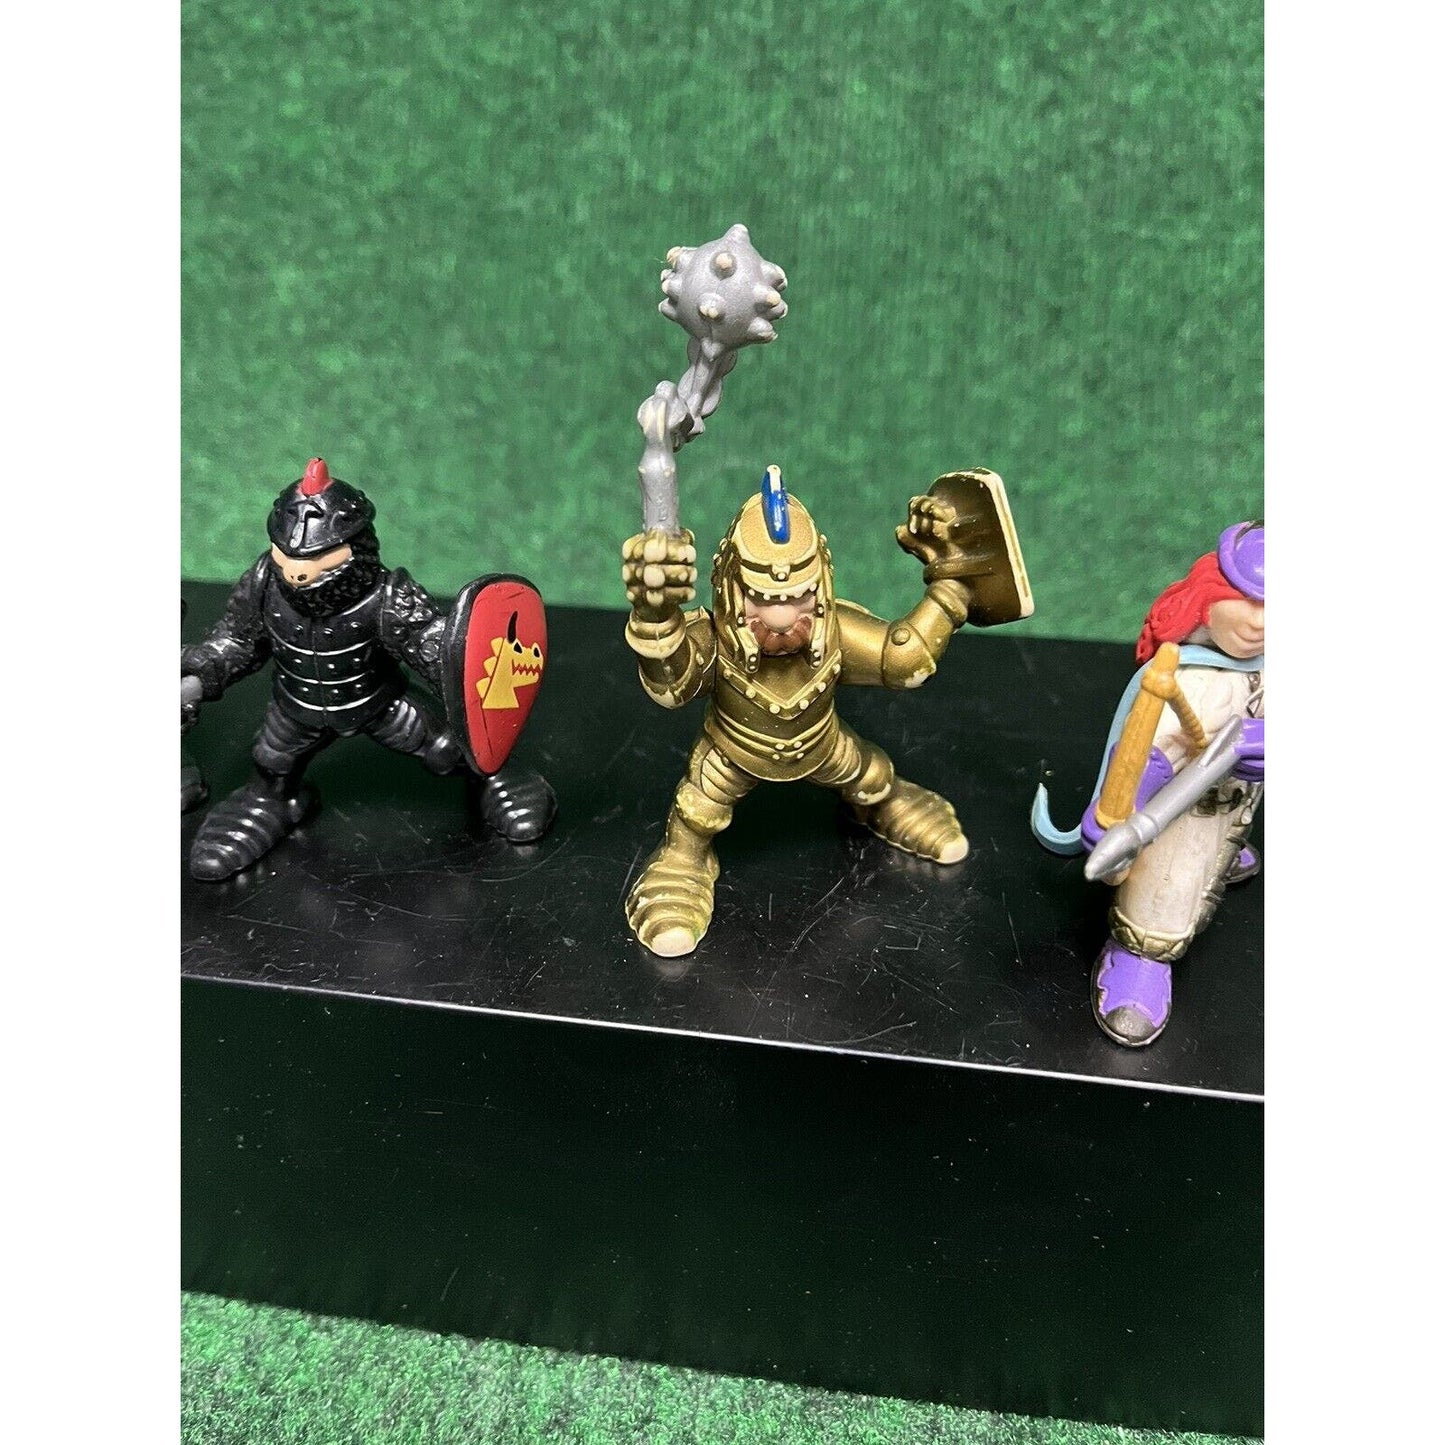 1994 Vtg Lot Of 4 Fisher Price Great Adventures Black Gold Knight Figures